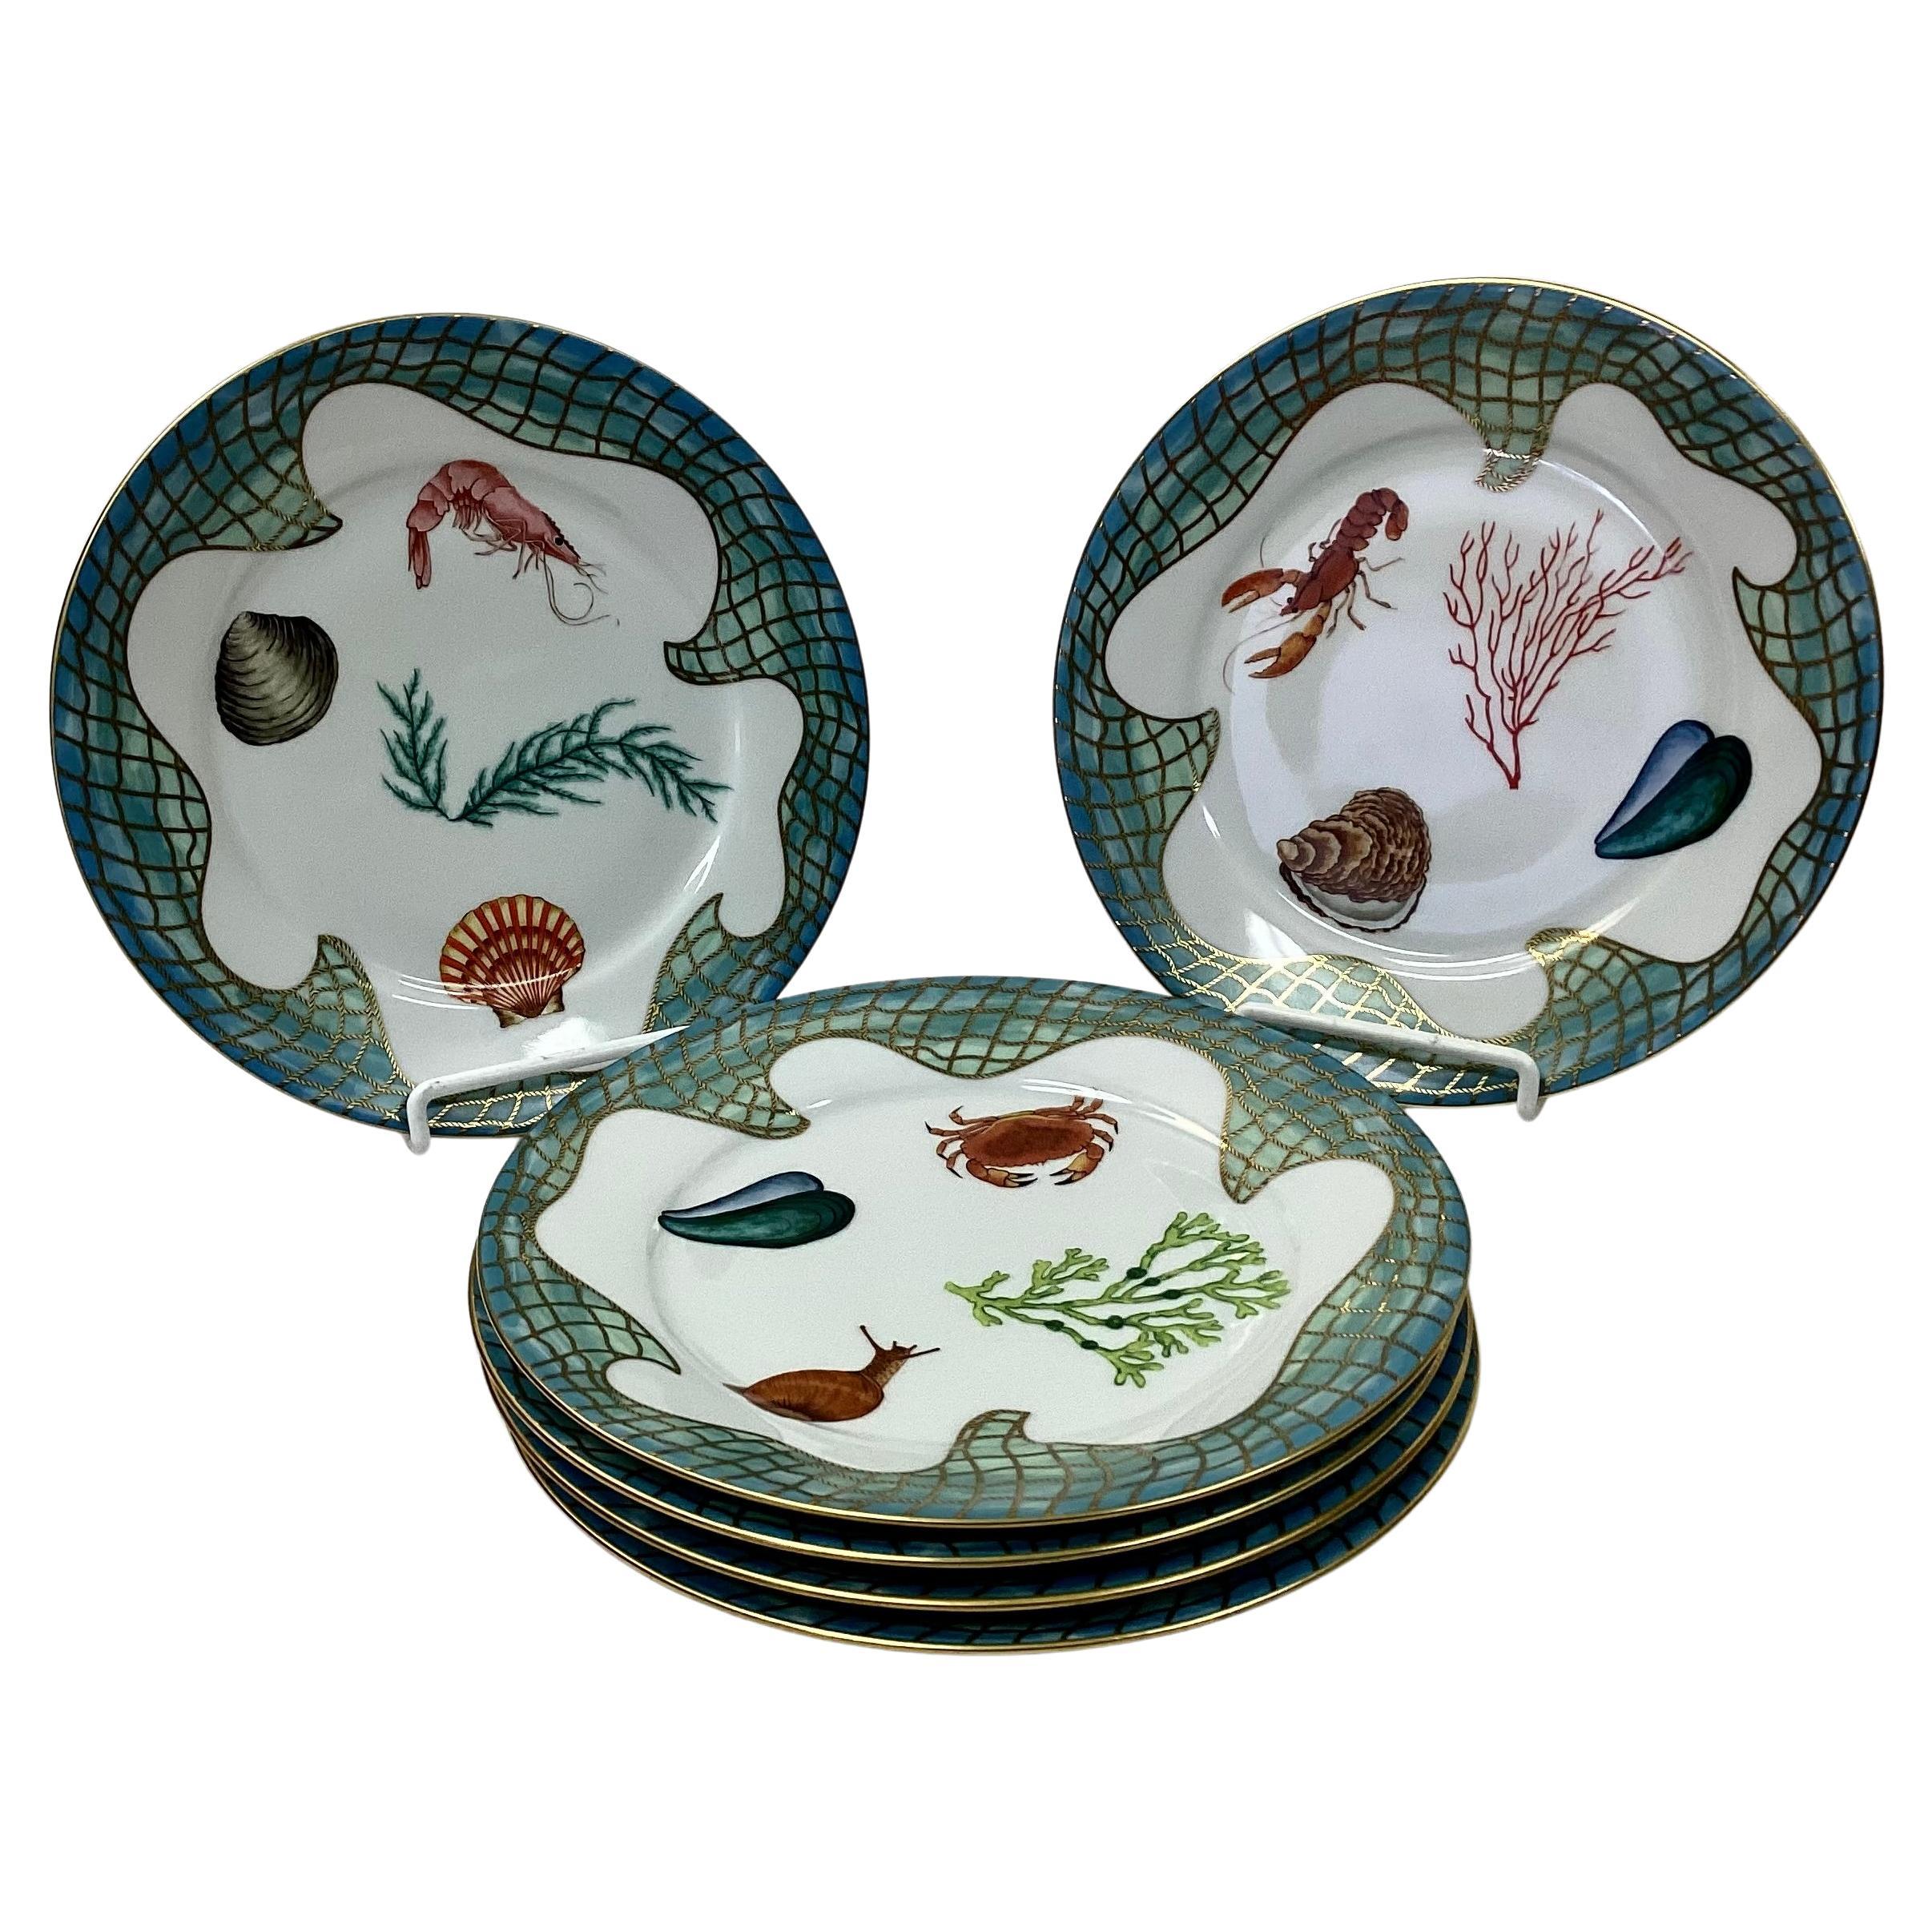 Set of Six (6) Lynn Chase Saint Tropez Porcelain salad plates. These unique plates are decorated with sea life and oceanic themes accented with 24K gold. Each plate design includes shrimp, crawfish, shells and coral surrounded by painted blue-green